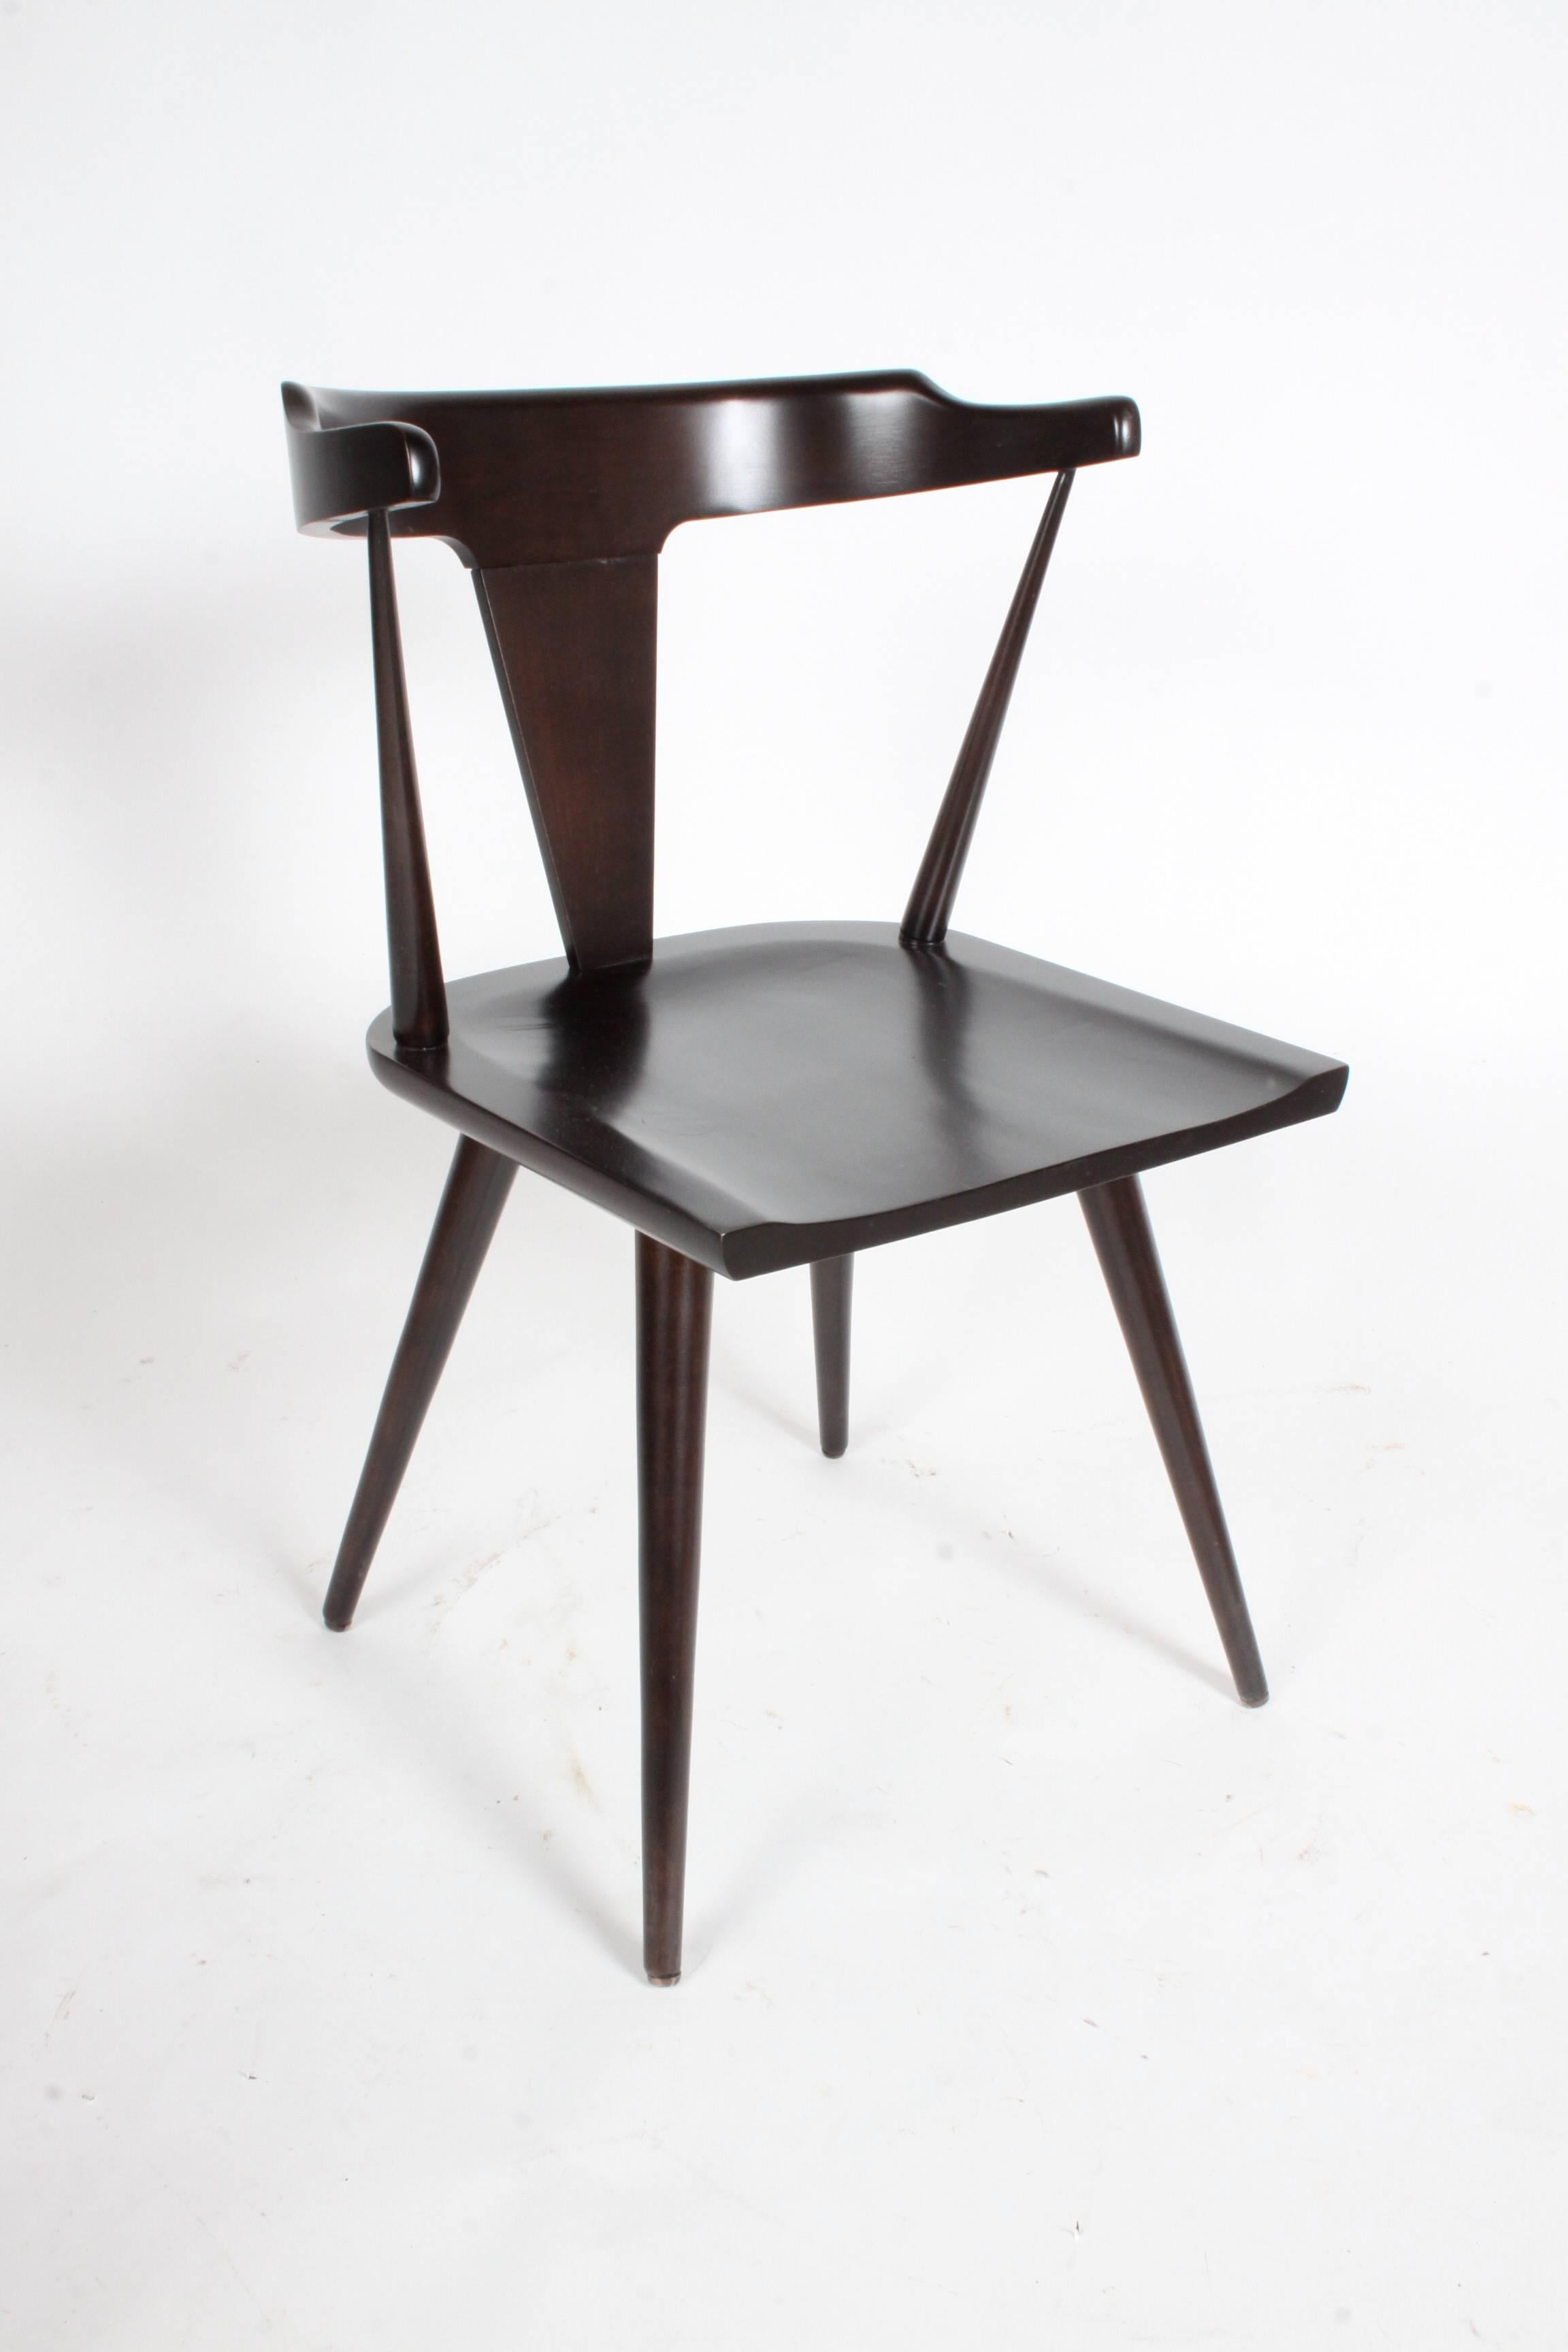 Set of four Paul McCobb Planner Group dining chairs model #1530, refinished in a dark espresso. No labels.